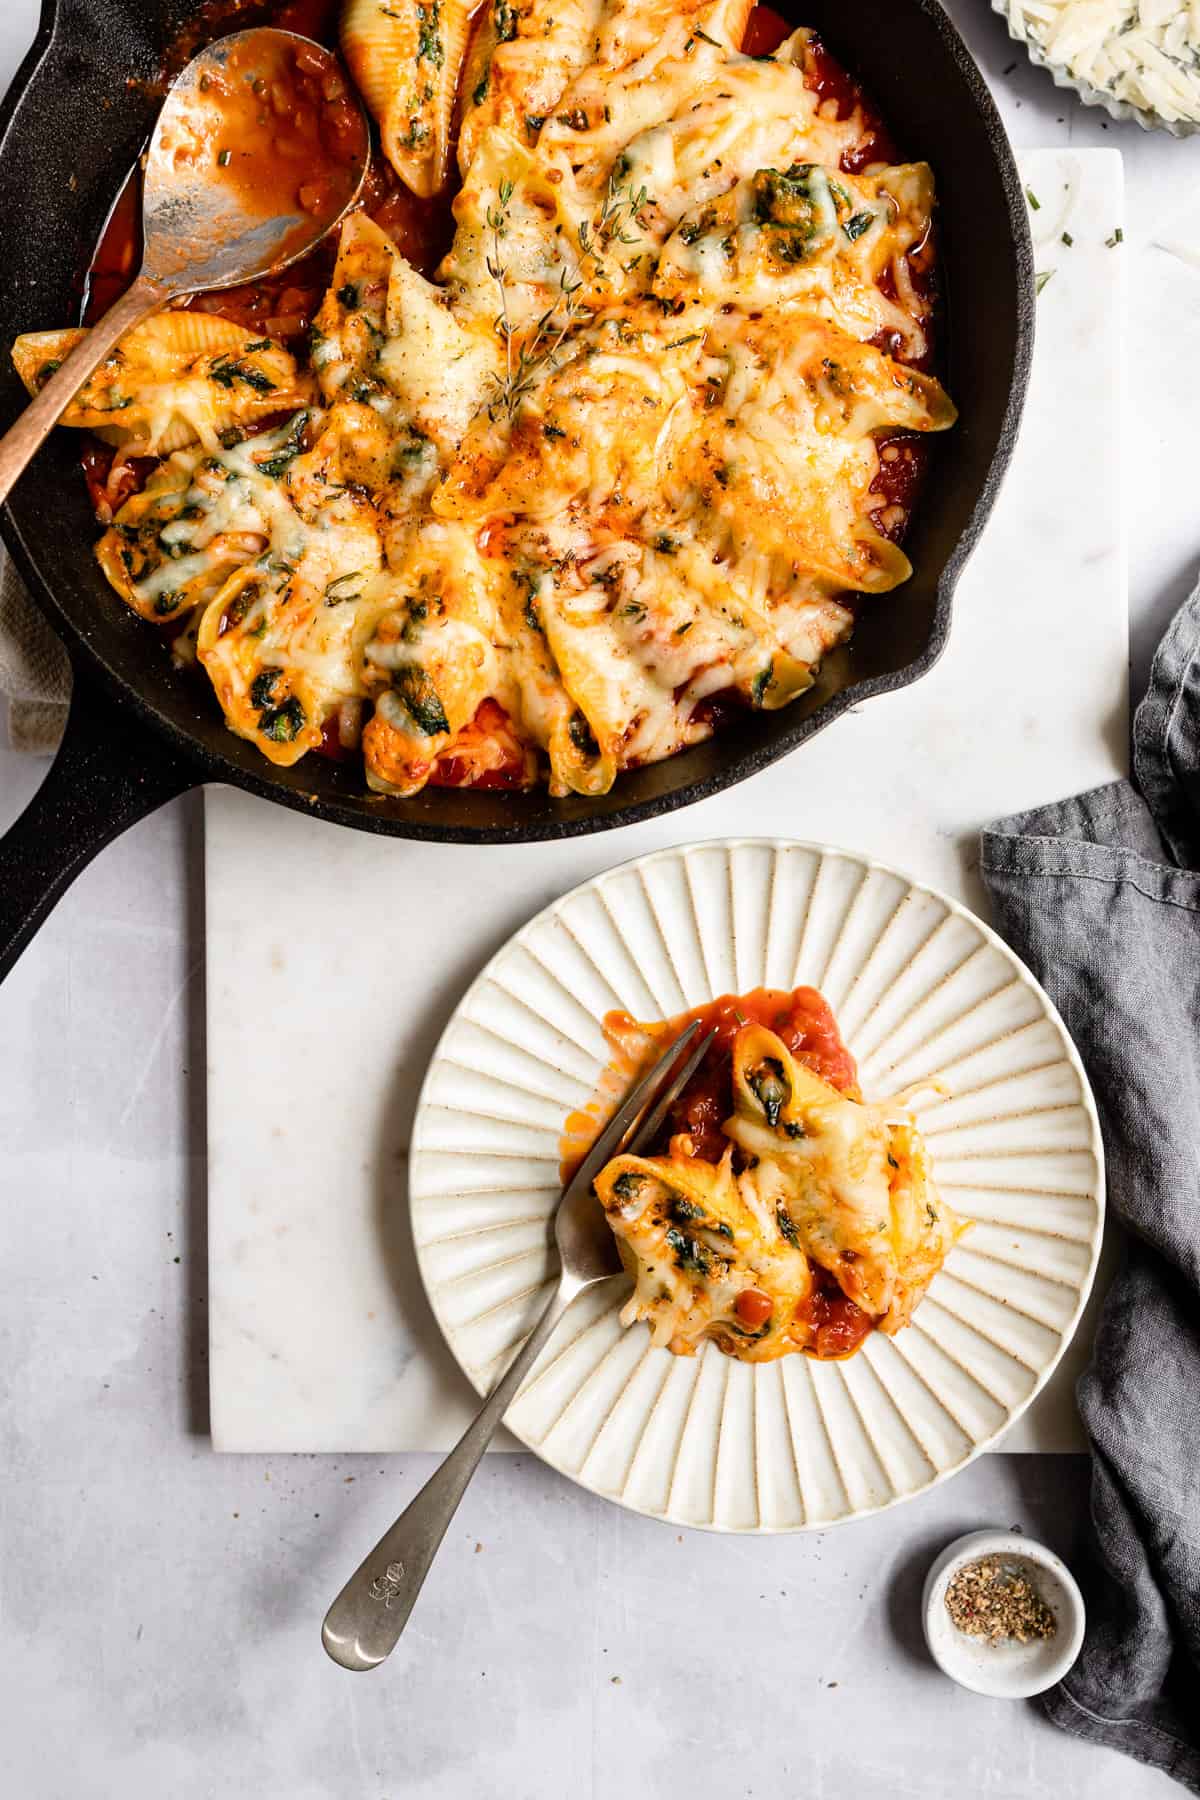 Stuffed shells in a skillet with a white plate.